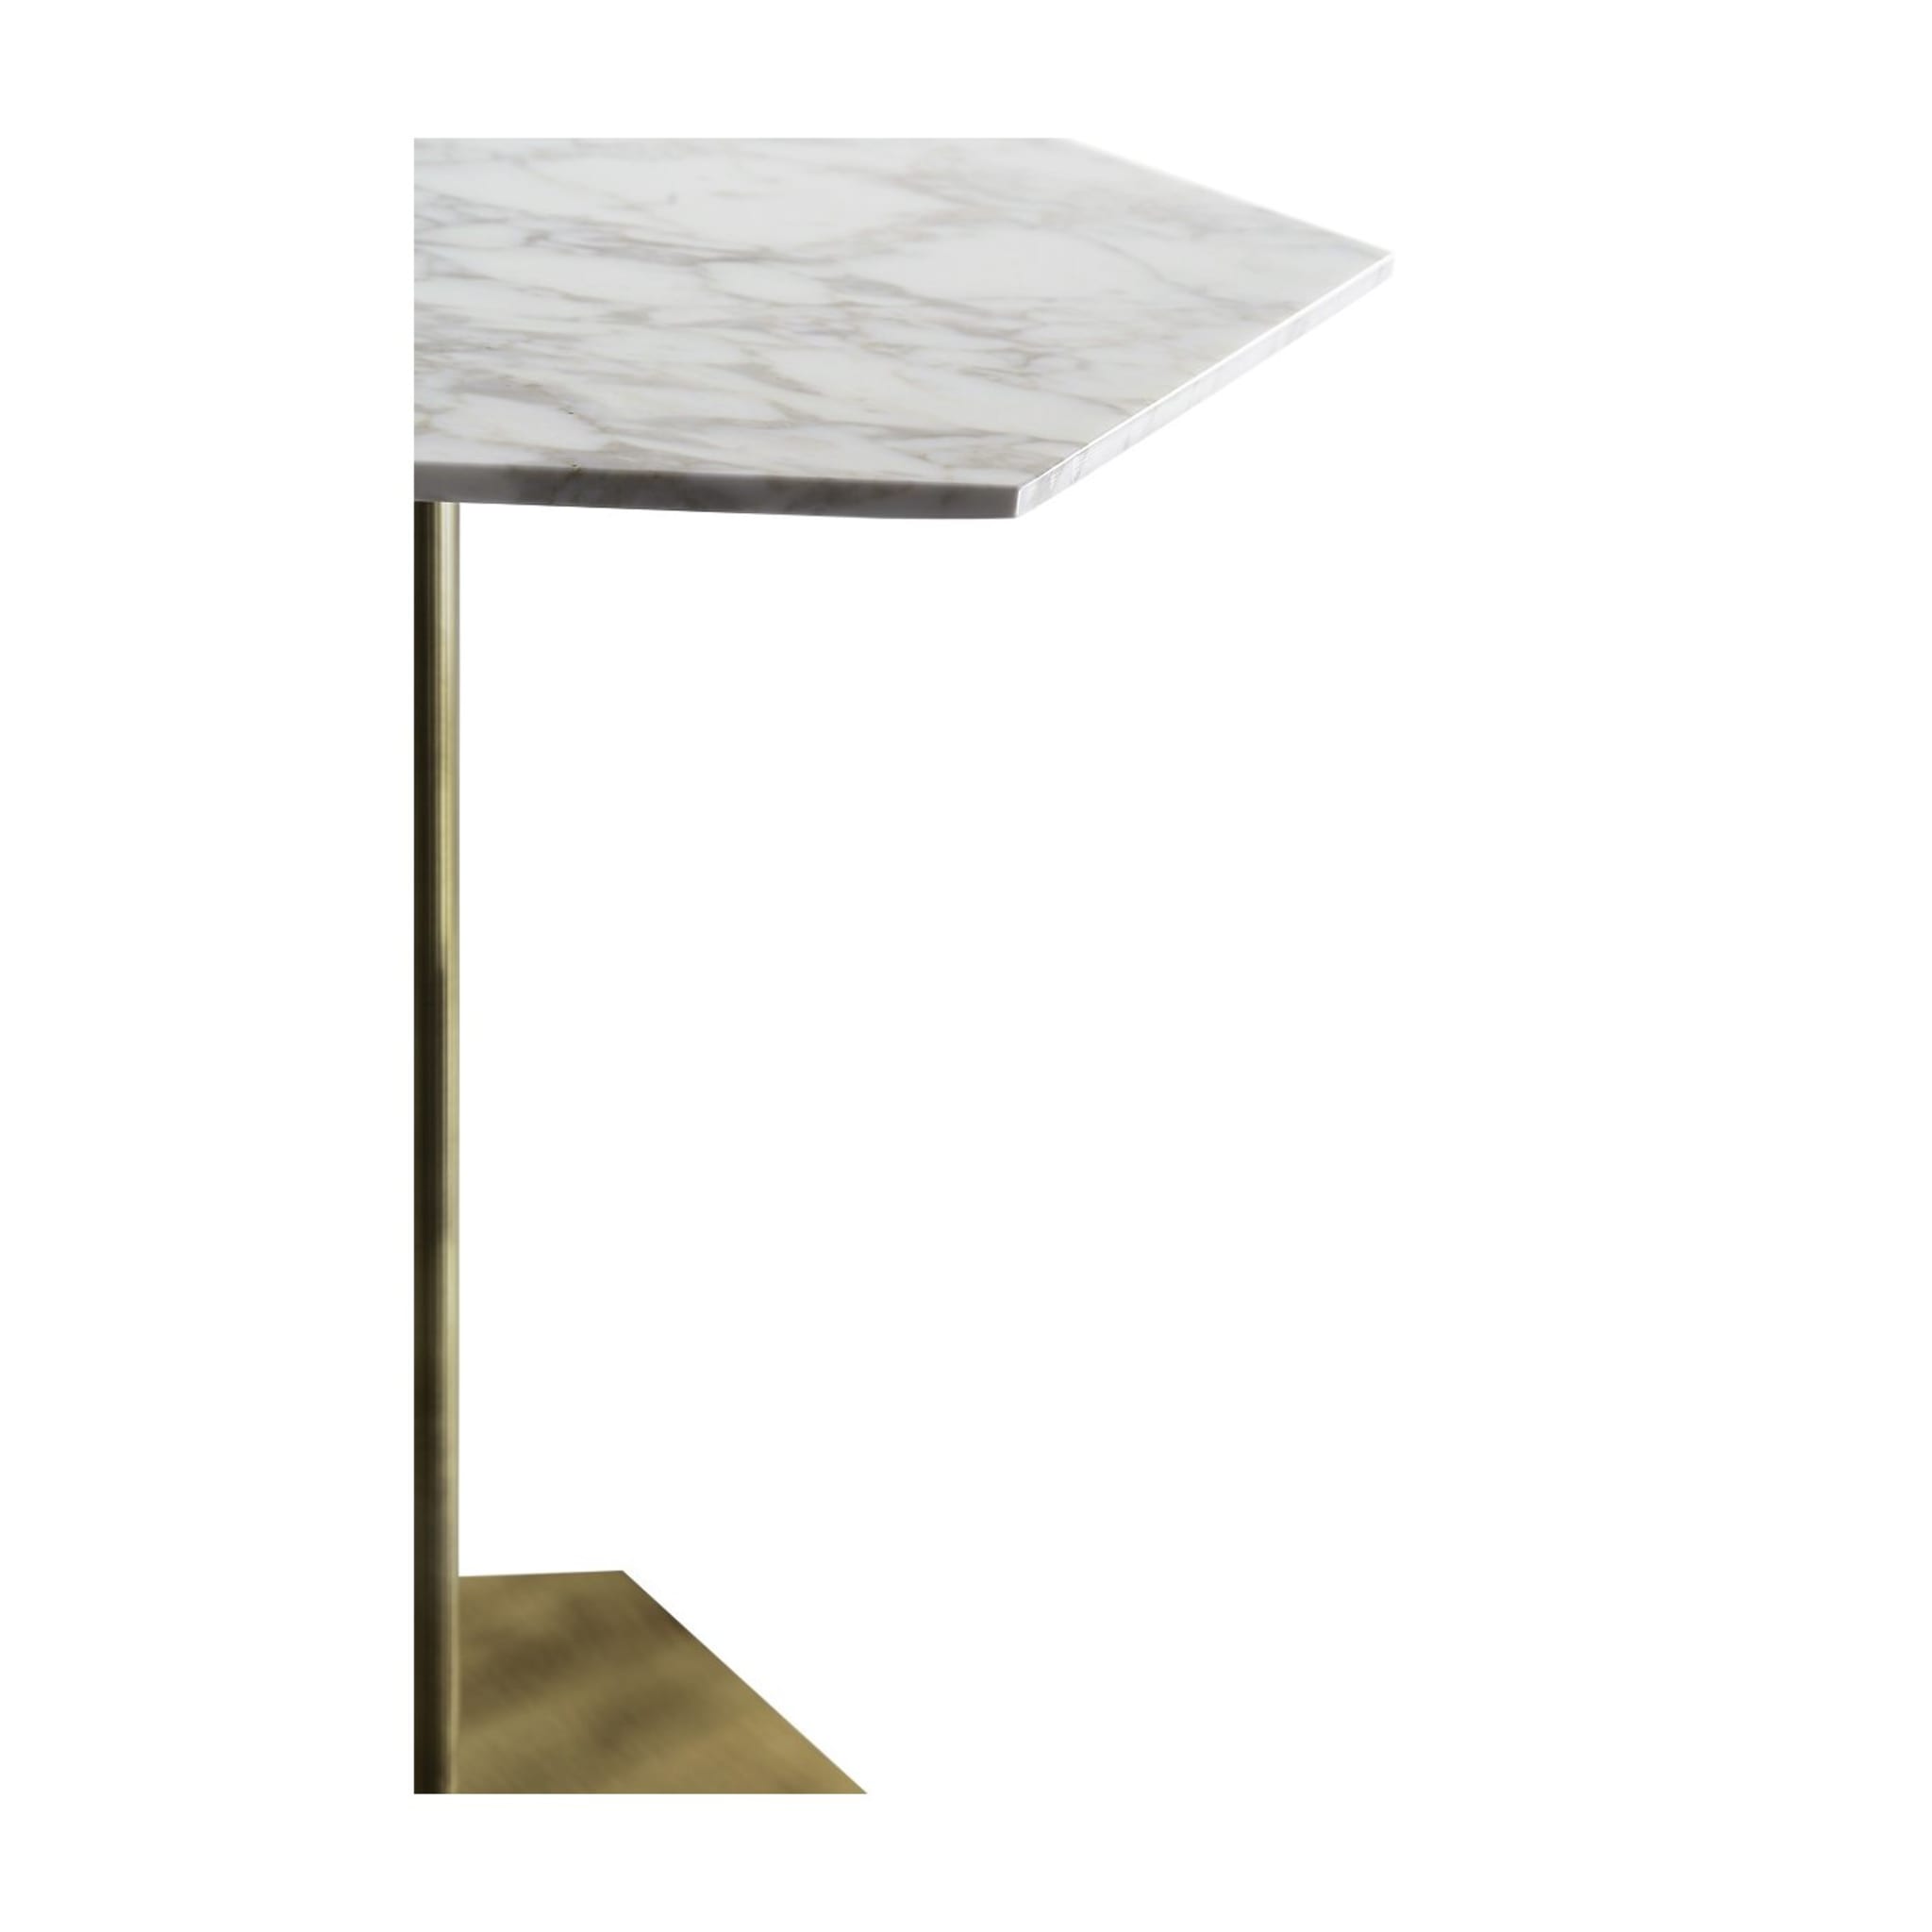 Ted Bistro Table with Marble top - Alternative view 1